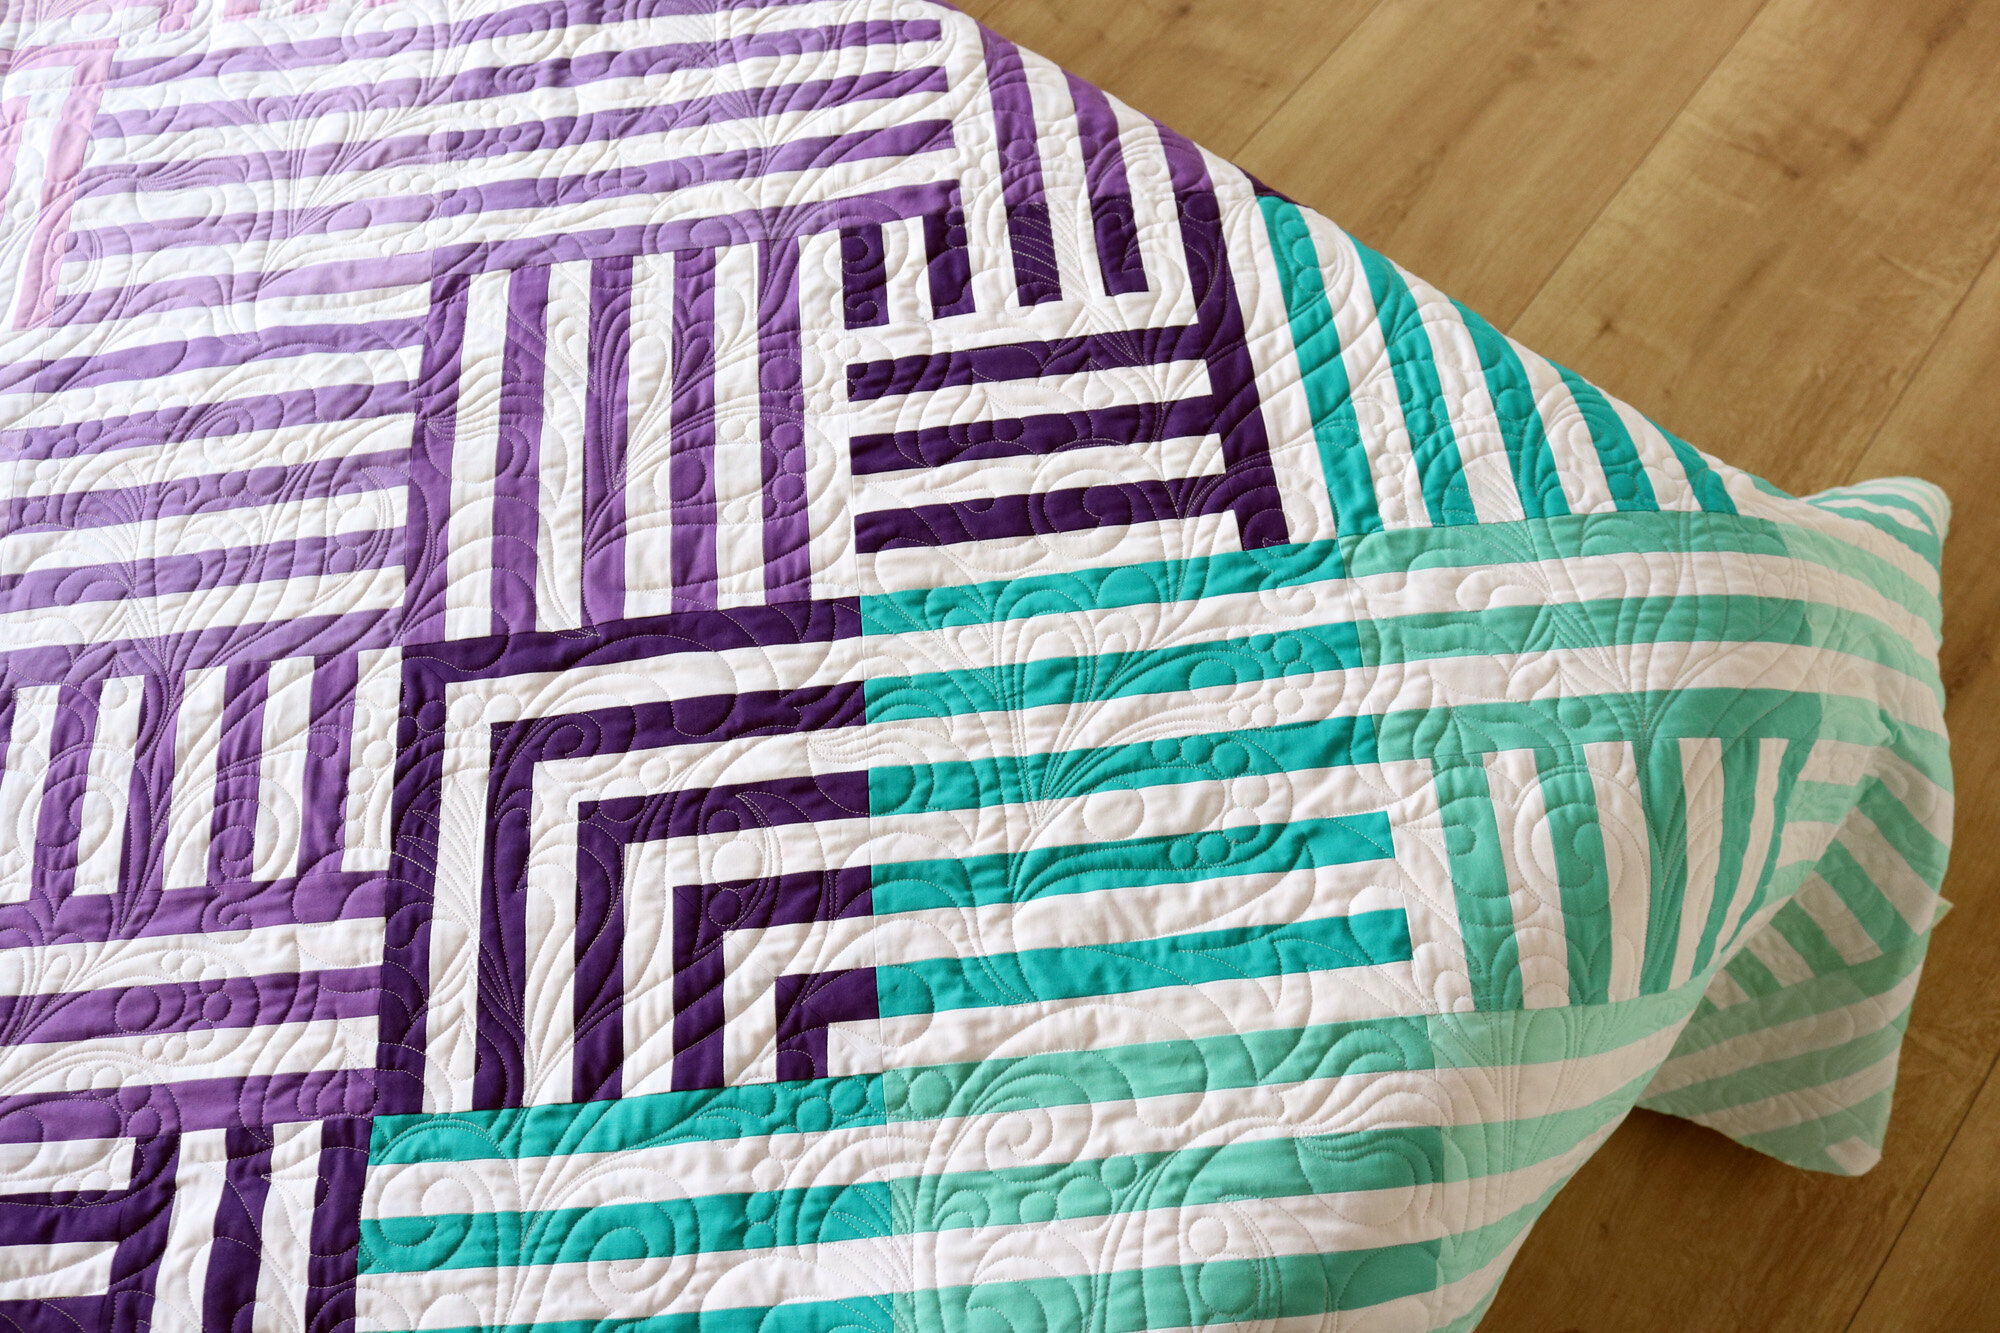 in the Quilting Studio, no. 21 — Stitched in Color